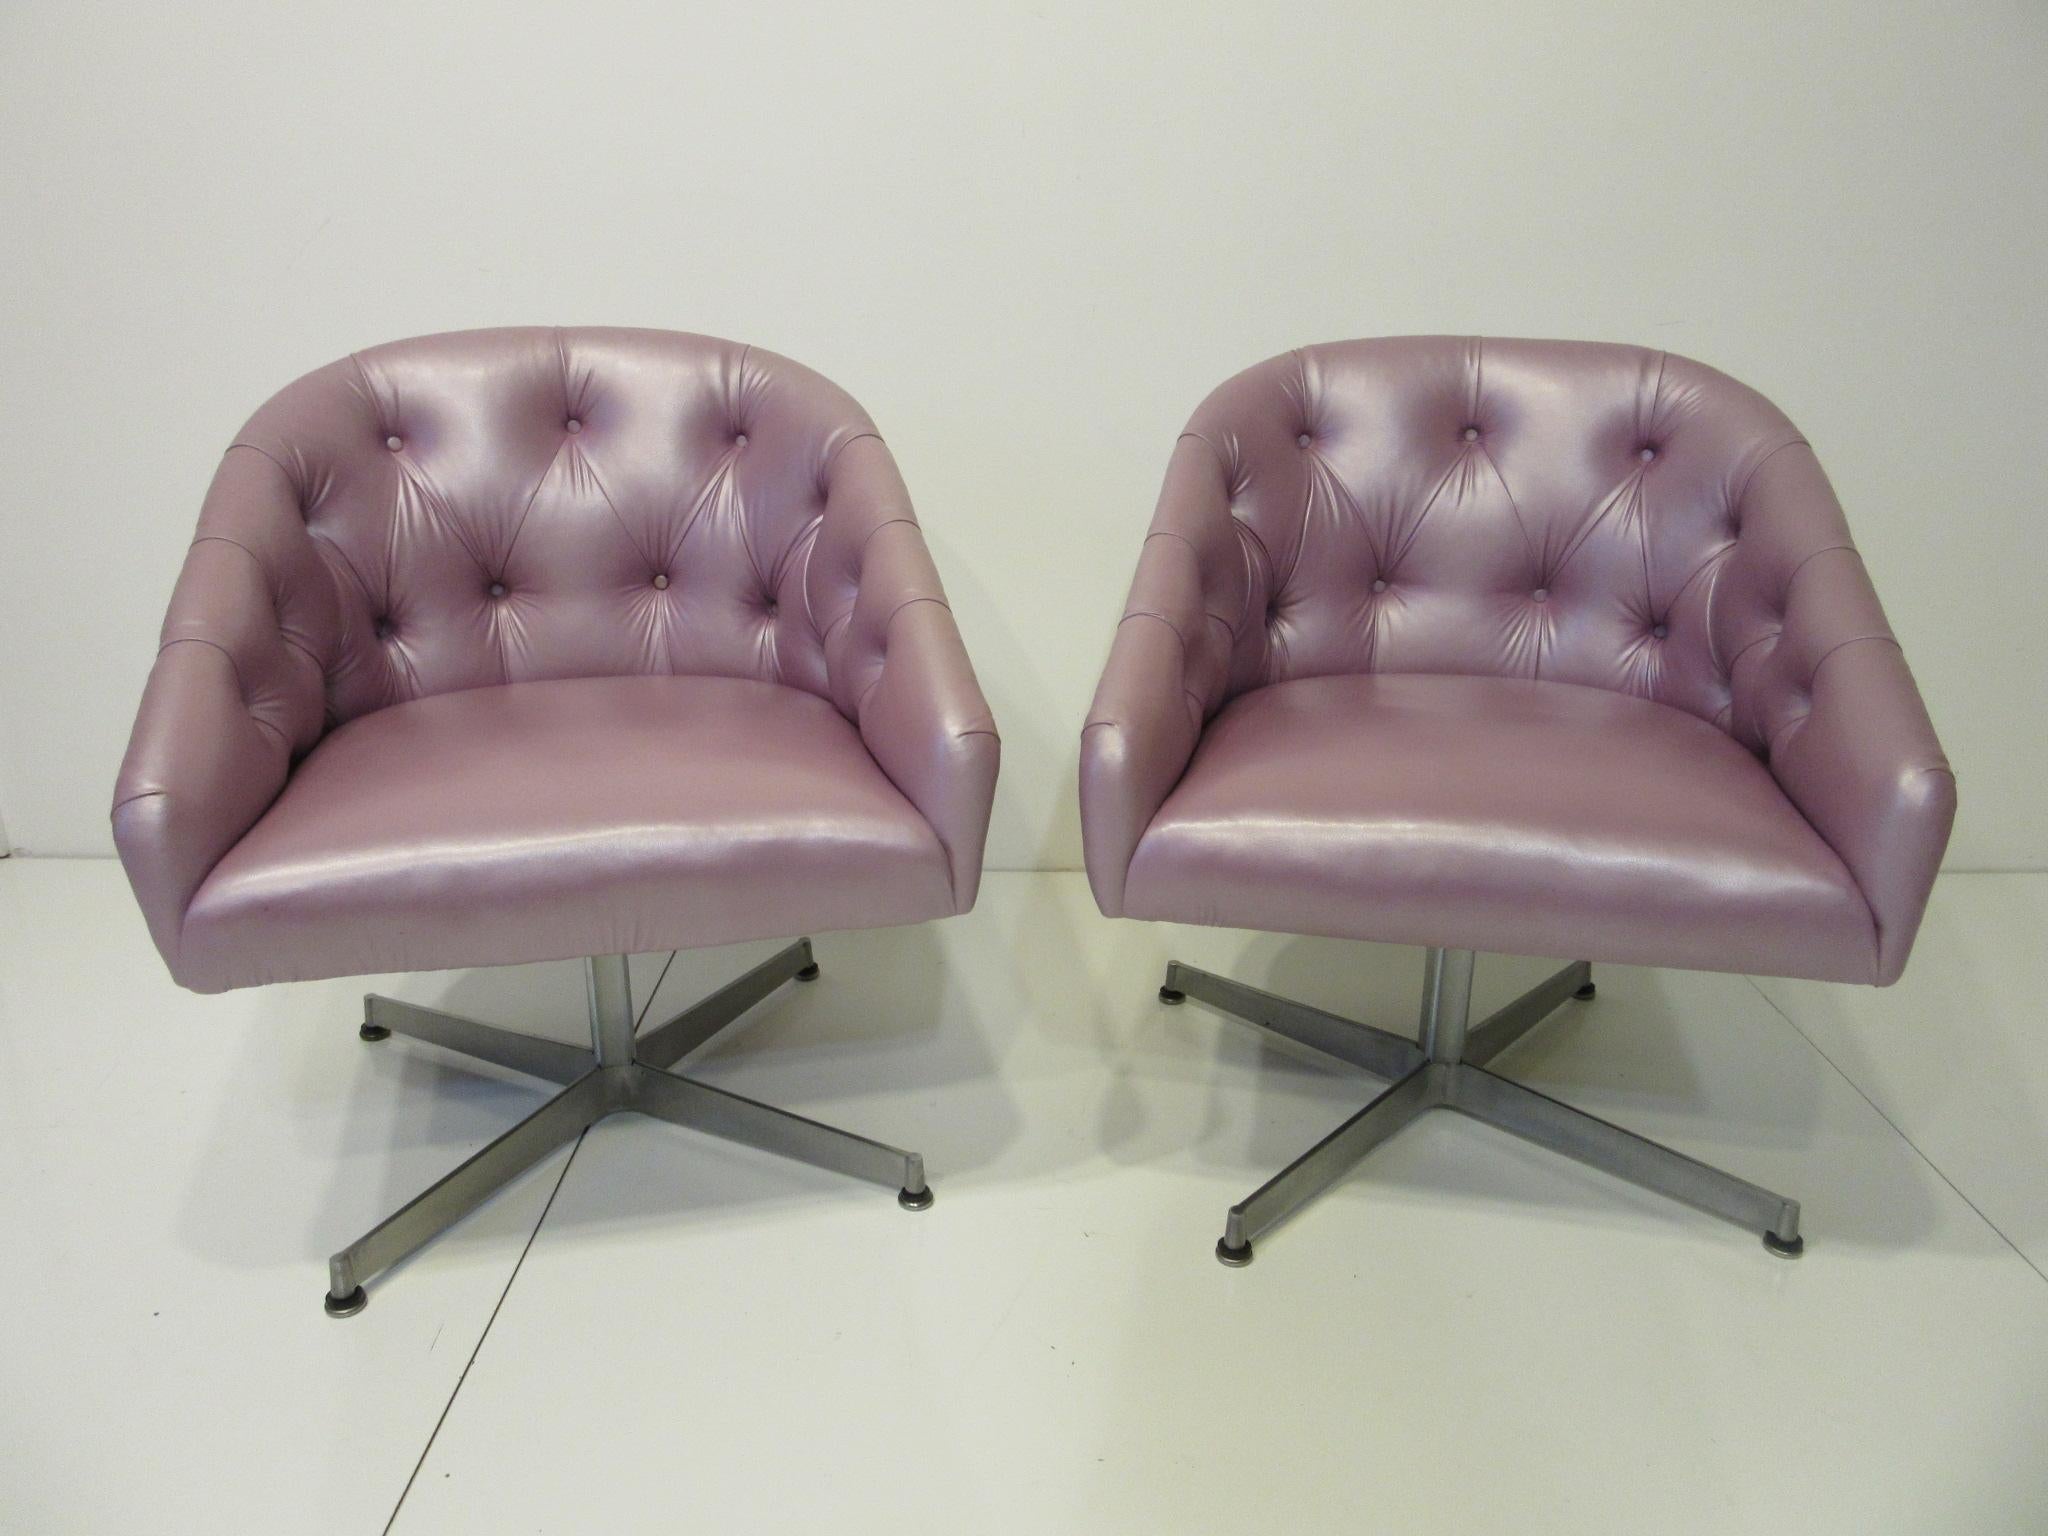 A pair of tufted chairs in a iridescent lavender original special order leatherette with cast aluminum swiveling star bases and domes of silent foot pads . Retains the original label to the bottom from the Shelby Williams Mfg. Company .